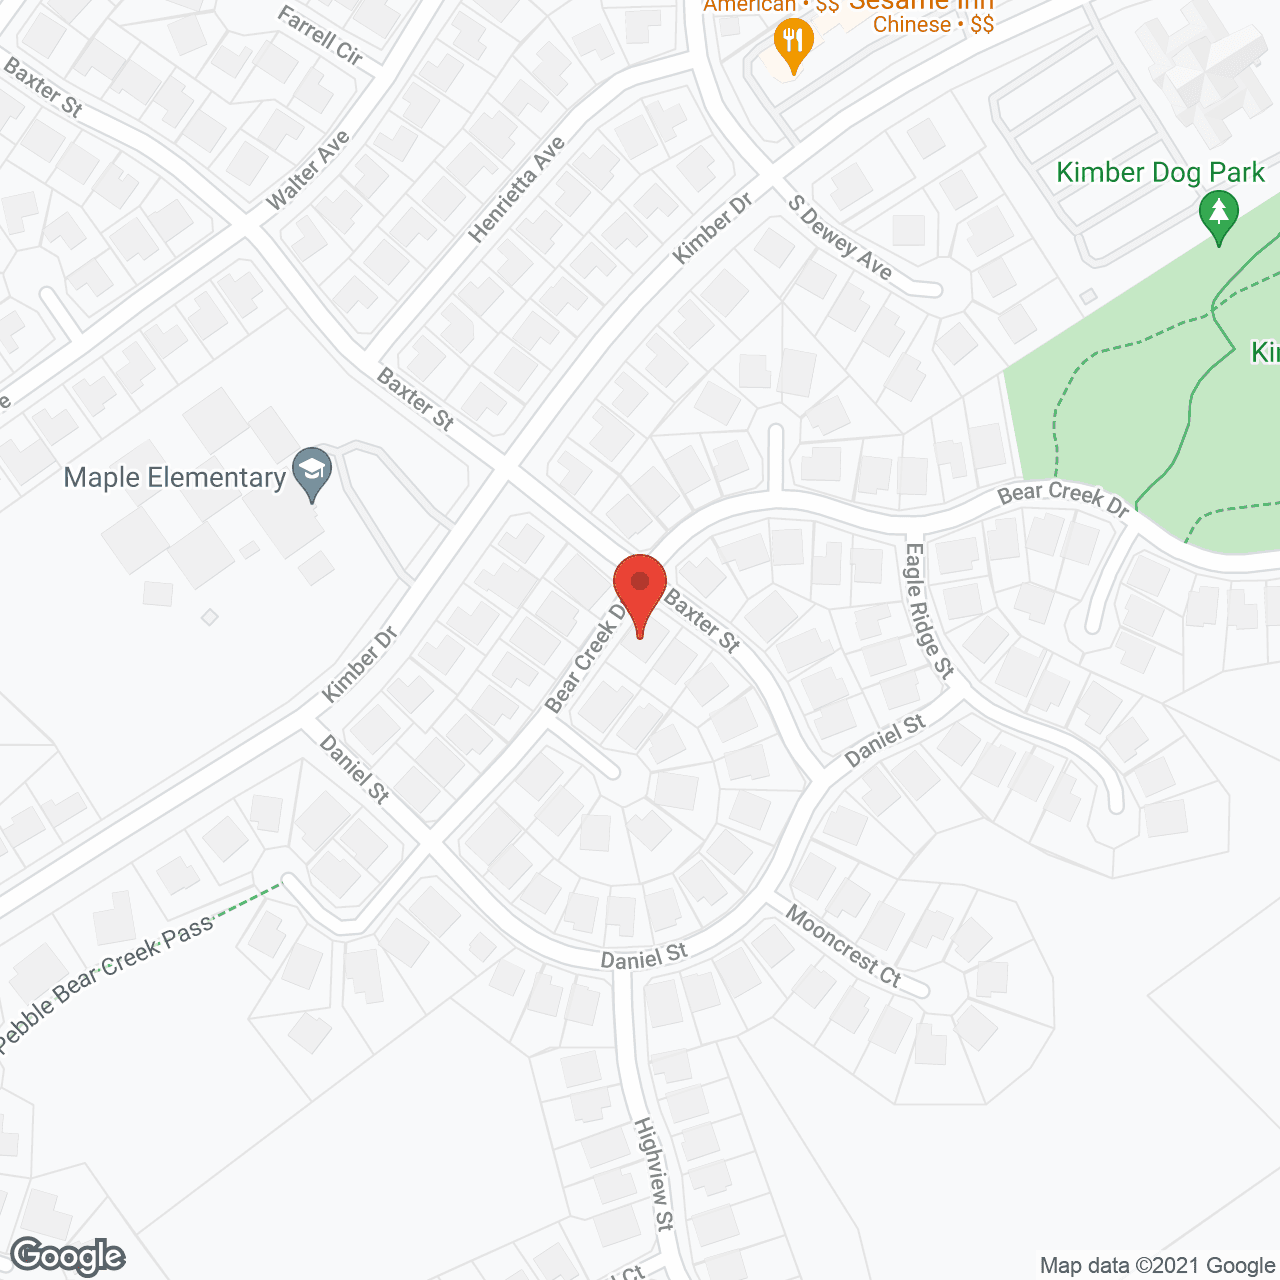 California Care Facility for the Elderly in google map